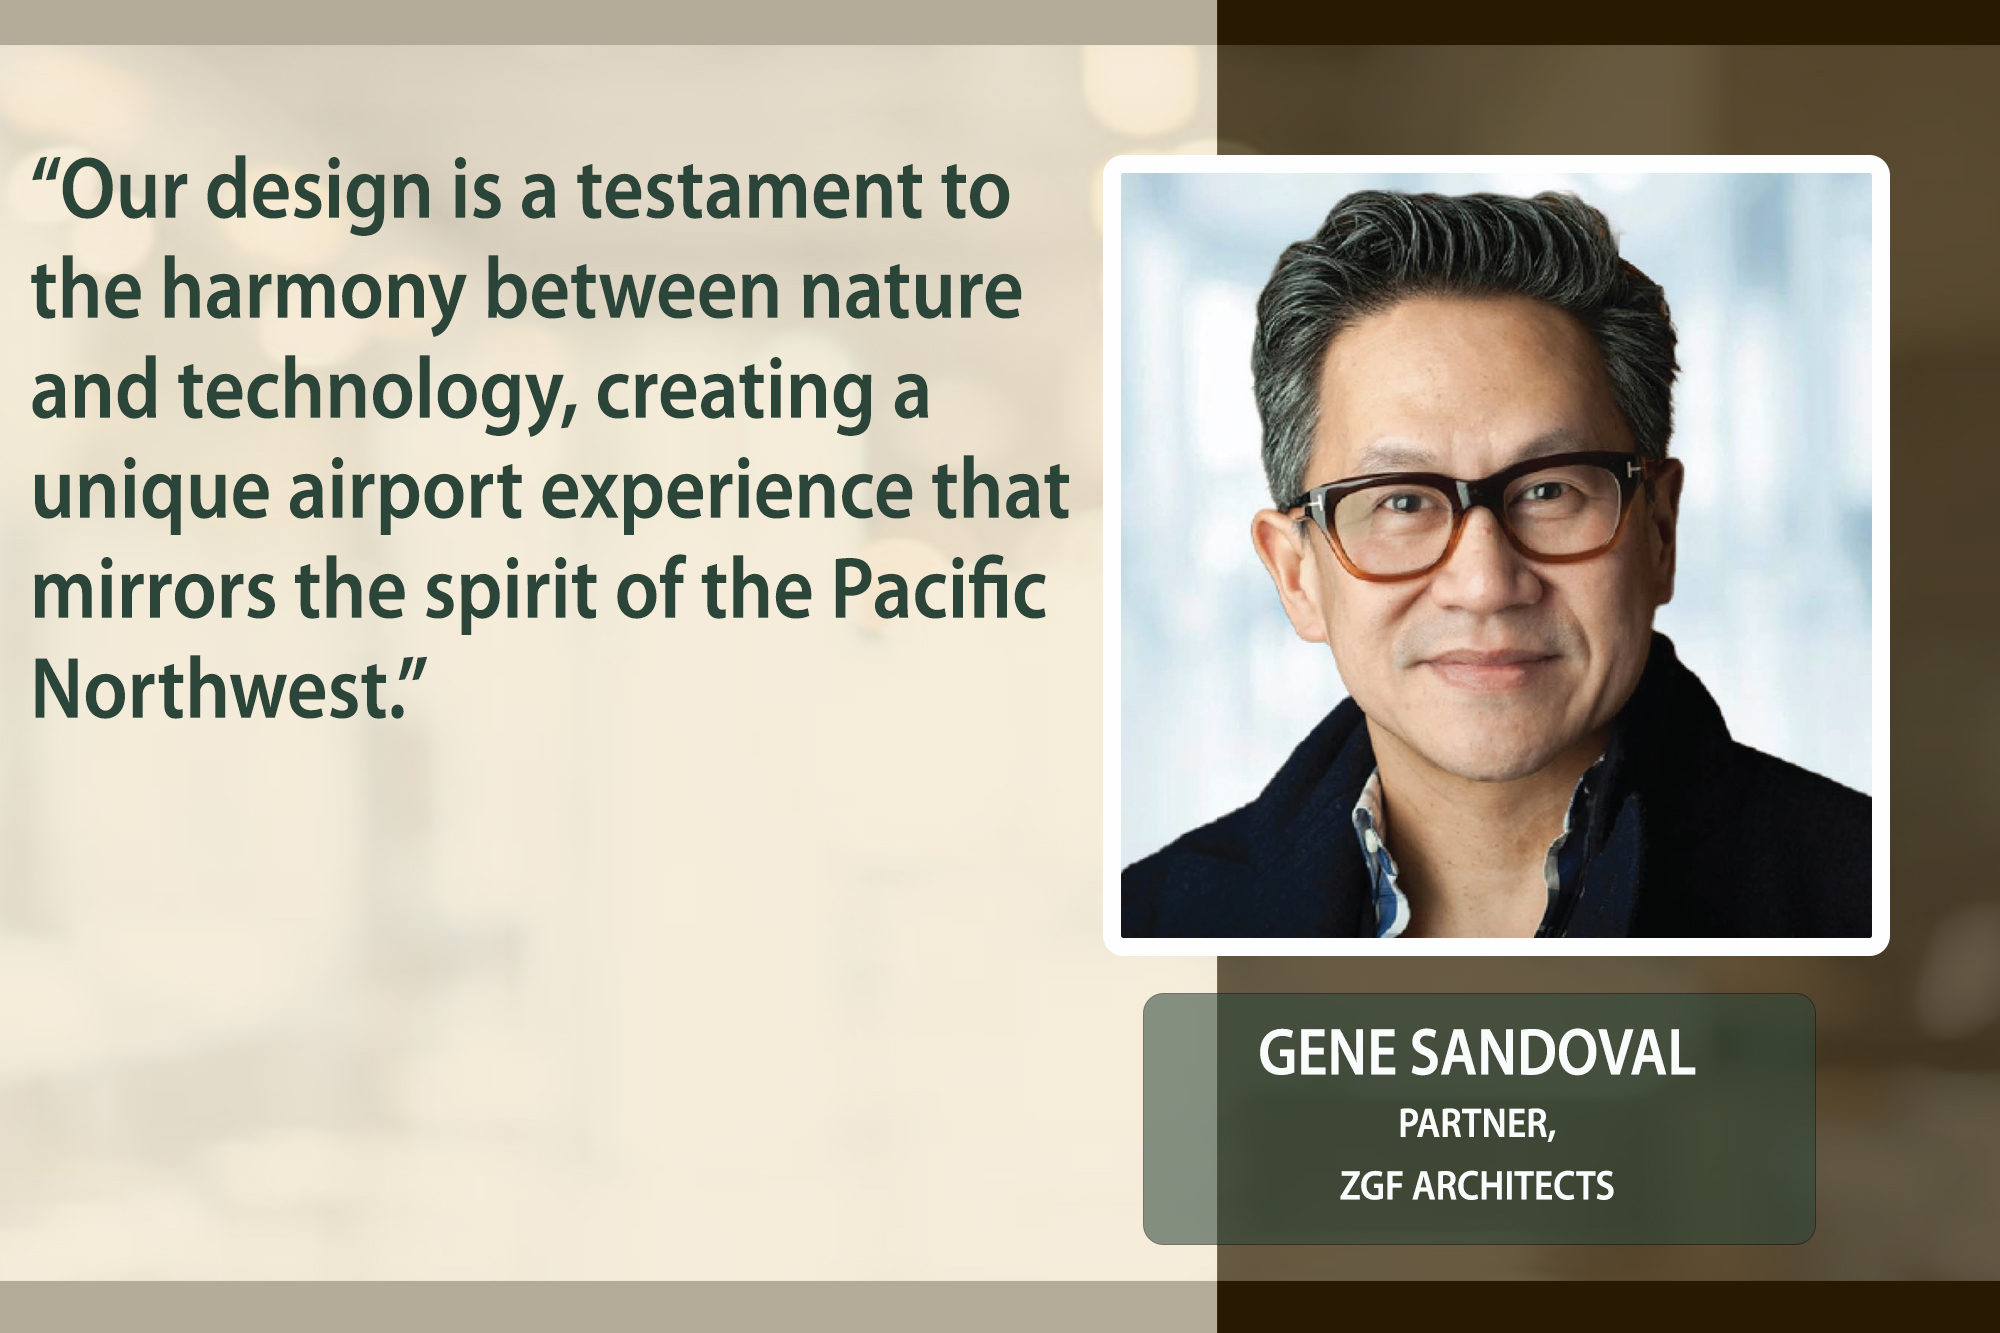 Experience the symphony of sustainability and elegance at PDX airport